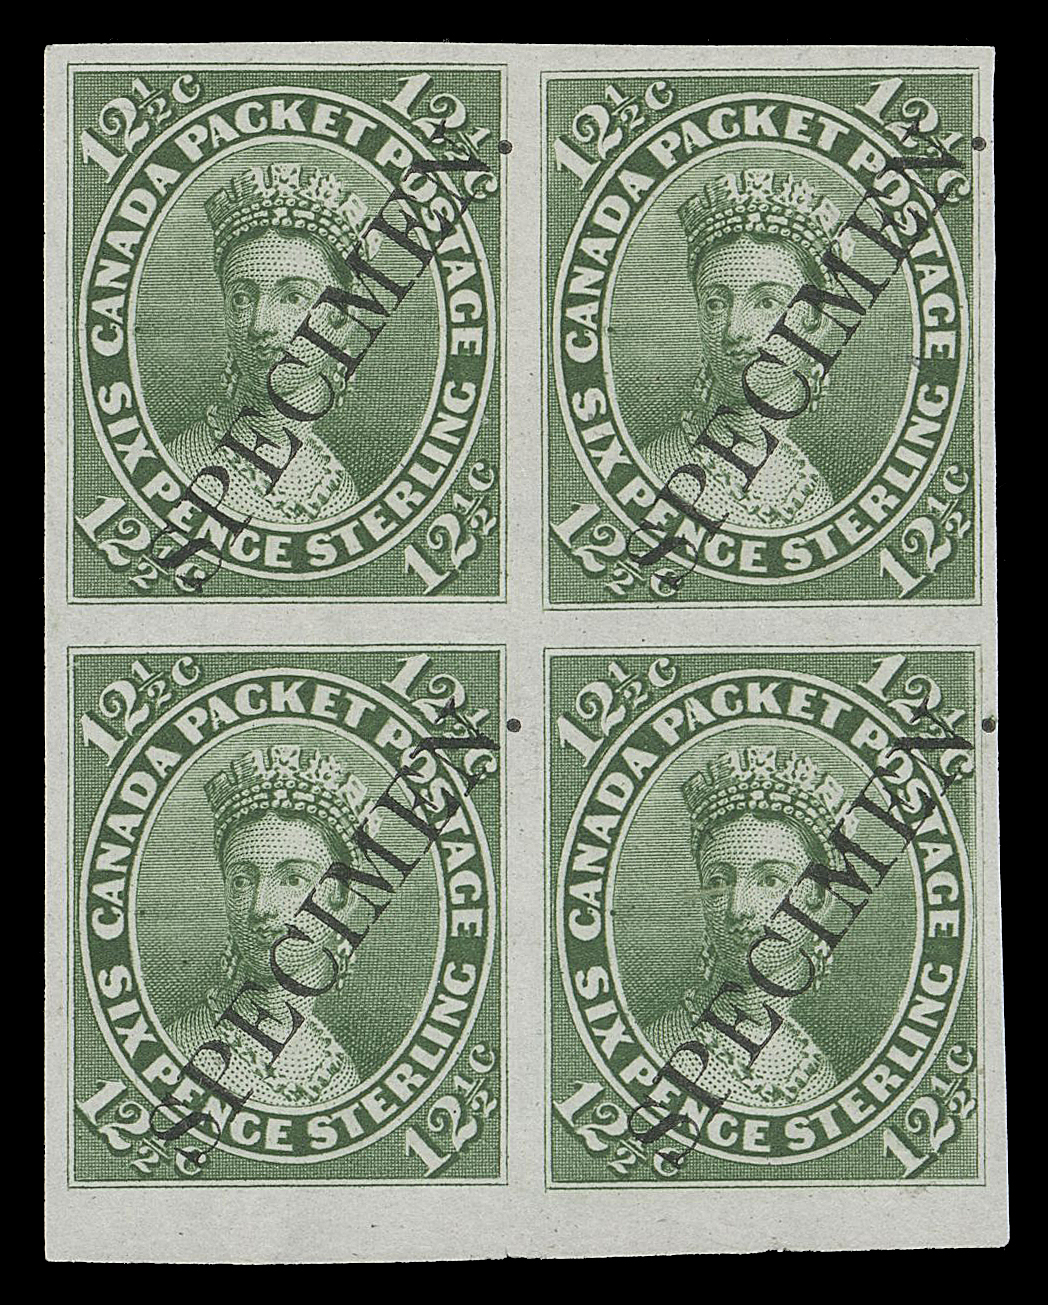 SEVEN AND ONE HALF PENCE AND TWELVE AND ONE HALF CENTS  18Piii,A most elusive plate proof block on india paper with diagonal SPECIMEN overprints in black, sheet margin at foot. A superb block - certainly one of the largest surviving multiples with the diagonal specimen, XF

Provenance: The "Lindemann" Collection (private treaty, circa. 1997)

